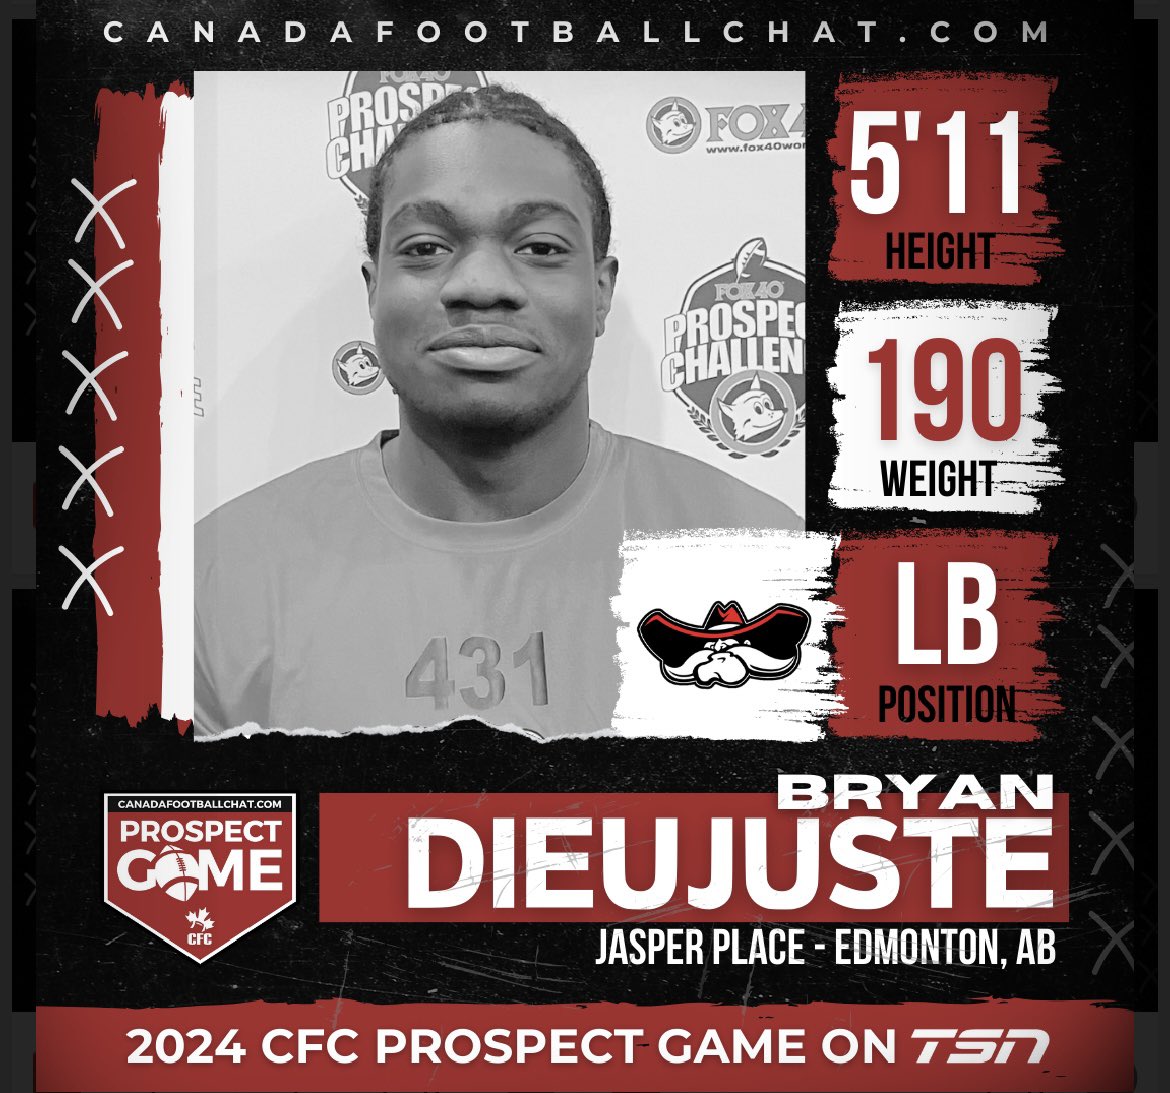 Super pumped to announce that I will be playing in the @CFCProspectGame live on @TSN_Sports at TD Place stadium on May 31. Would love to give a big thanks to @chatfootball for giving me the chance to perform in front of many @JPrebelATHLETIC @JPRebelsFB @Beau_Gleason